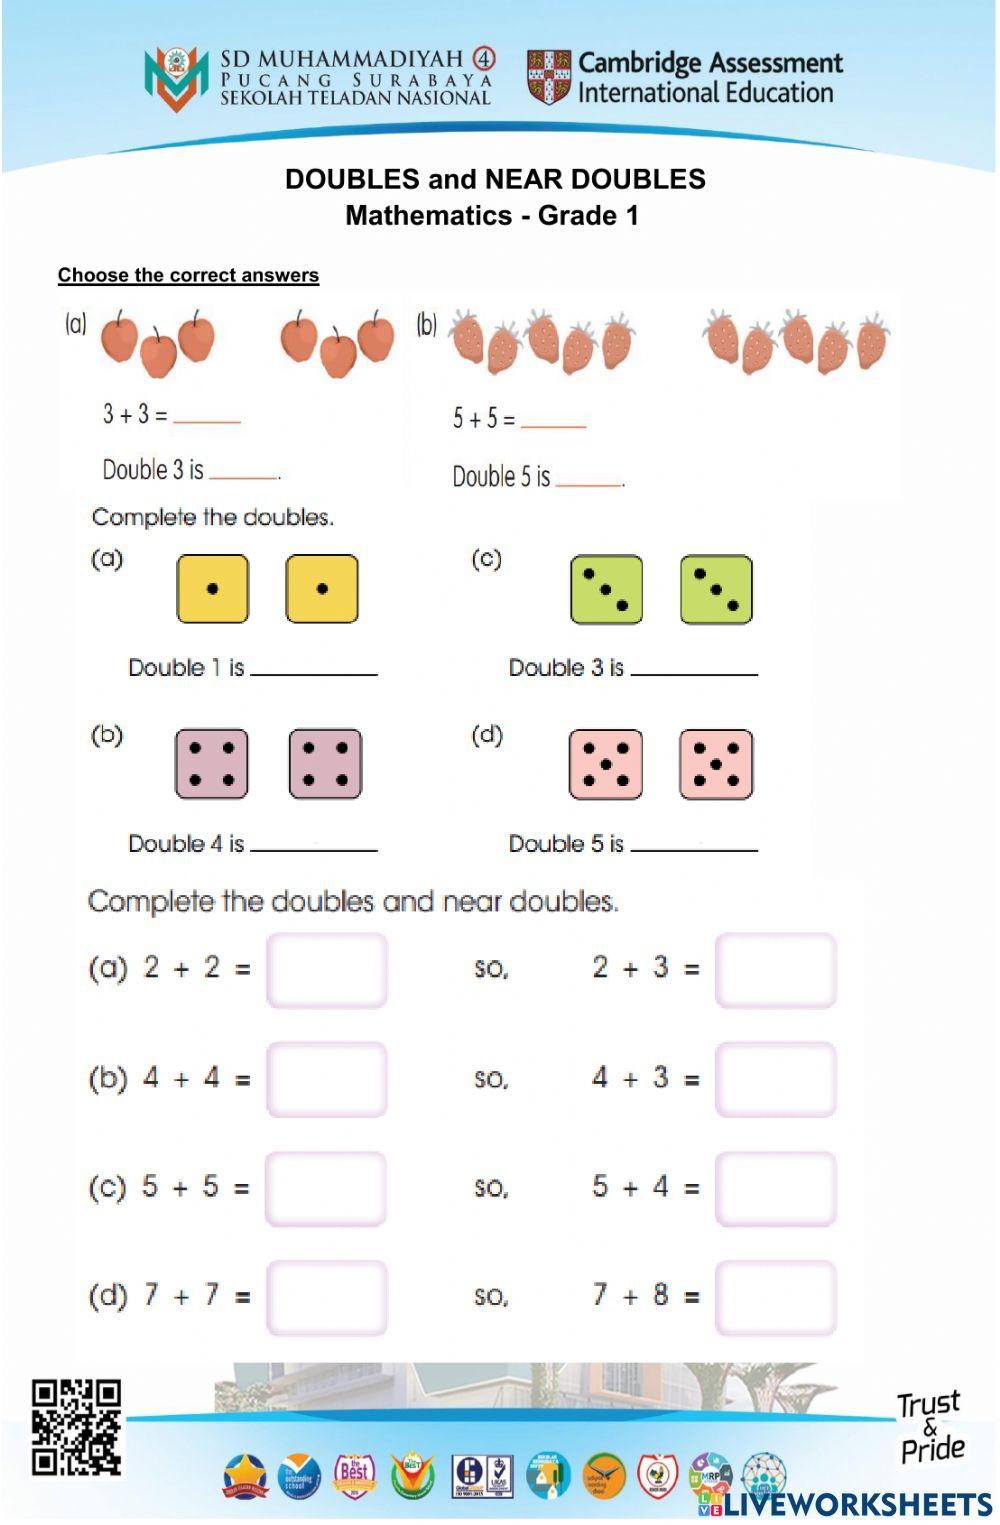 Subtraction and Addition (Doubles)